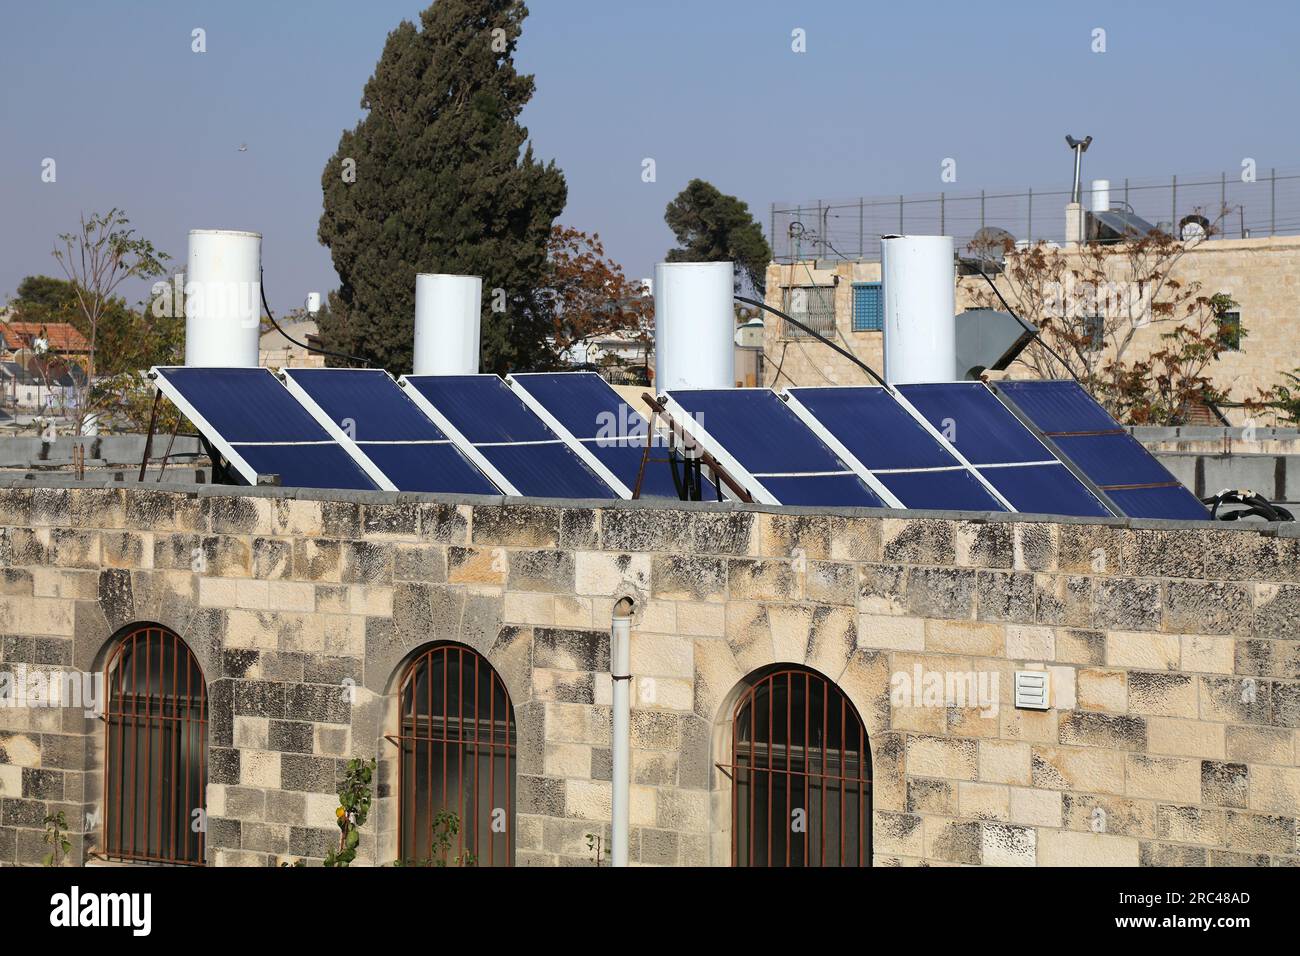 Roof solar powered water heaters in Jerusalem, Israel. Stock Photo